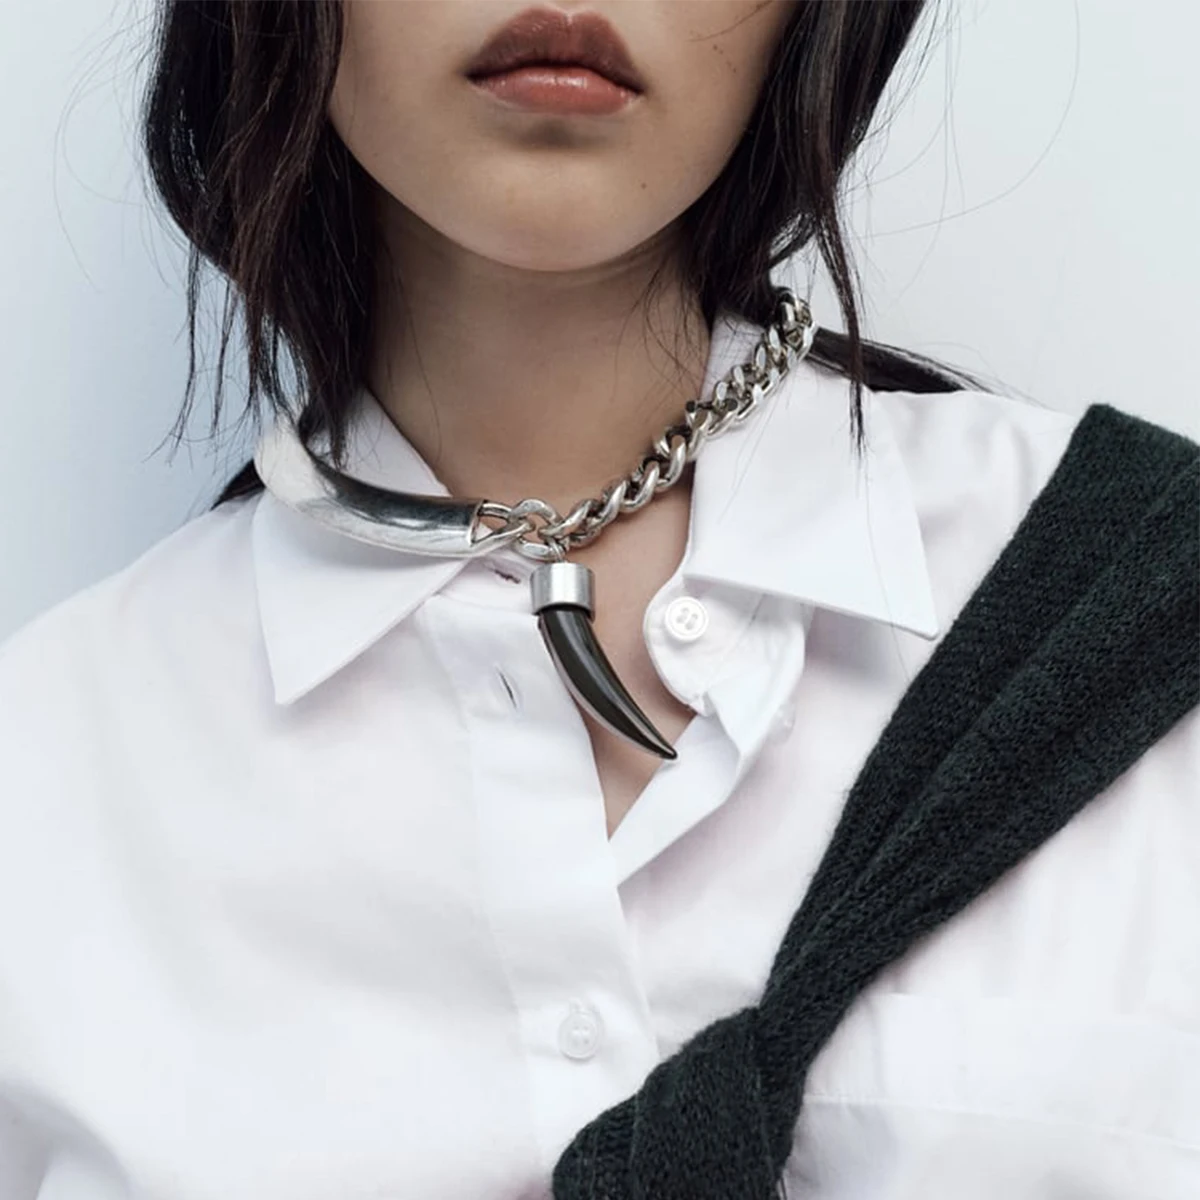 ZAA Vintage Metal Choker Necklaces Cow Horn Pendant Necklace for Women Punk Hiphop Jewelry Neck Accessories